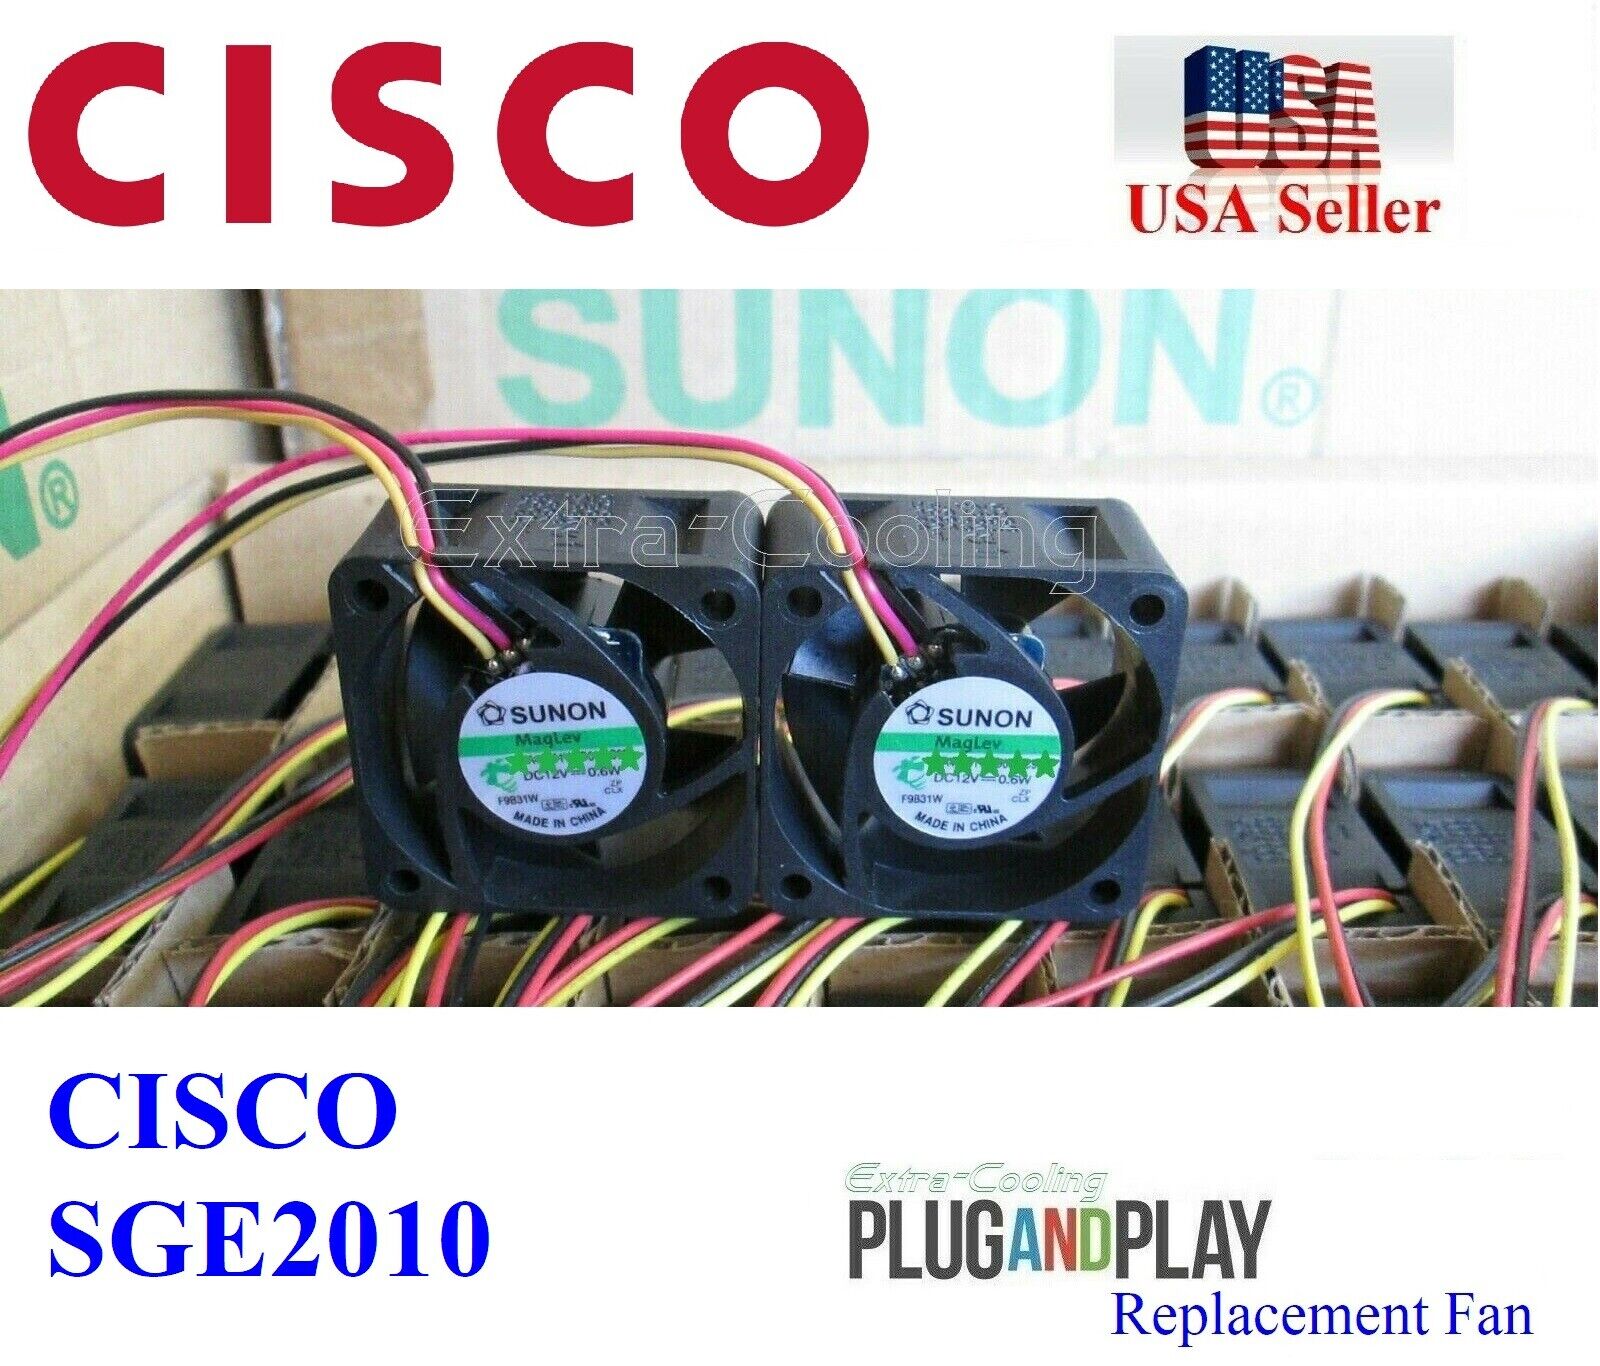 2x Cisco Linksys SGE2010 Replacement Fans